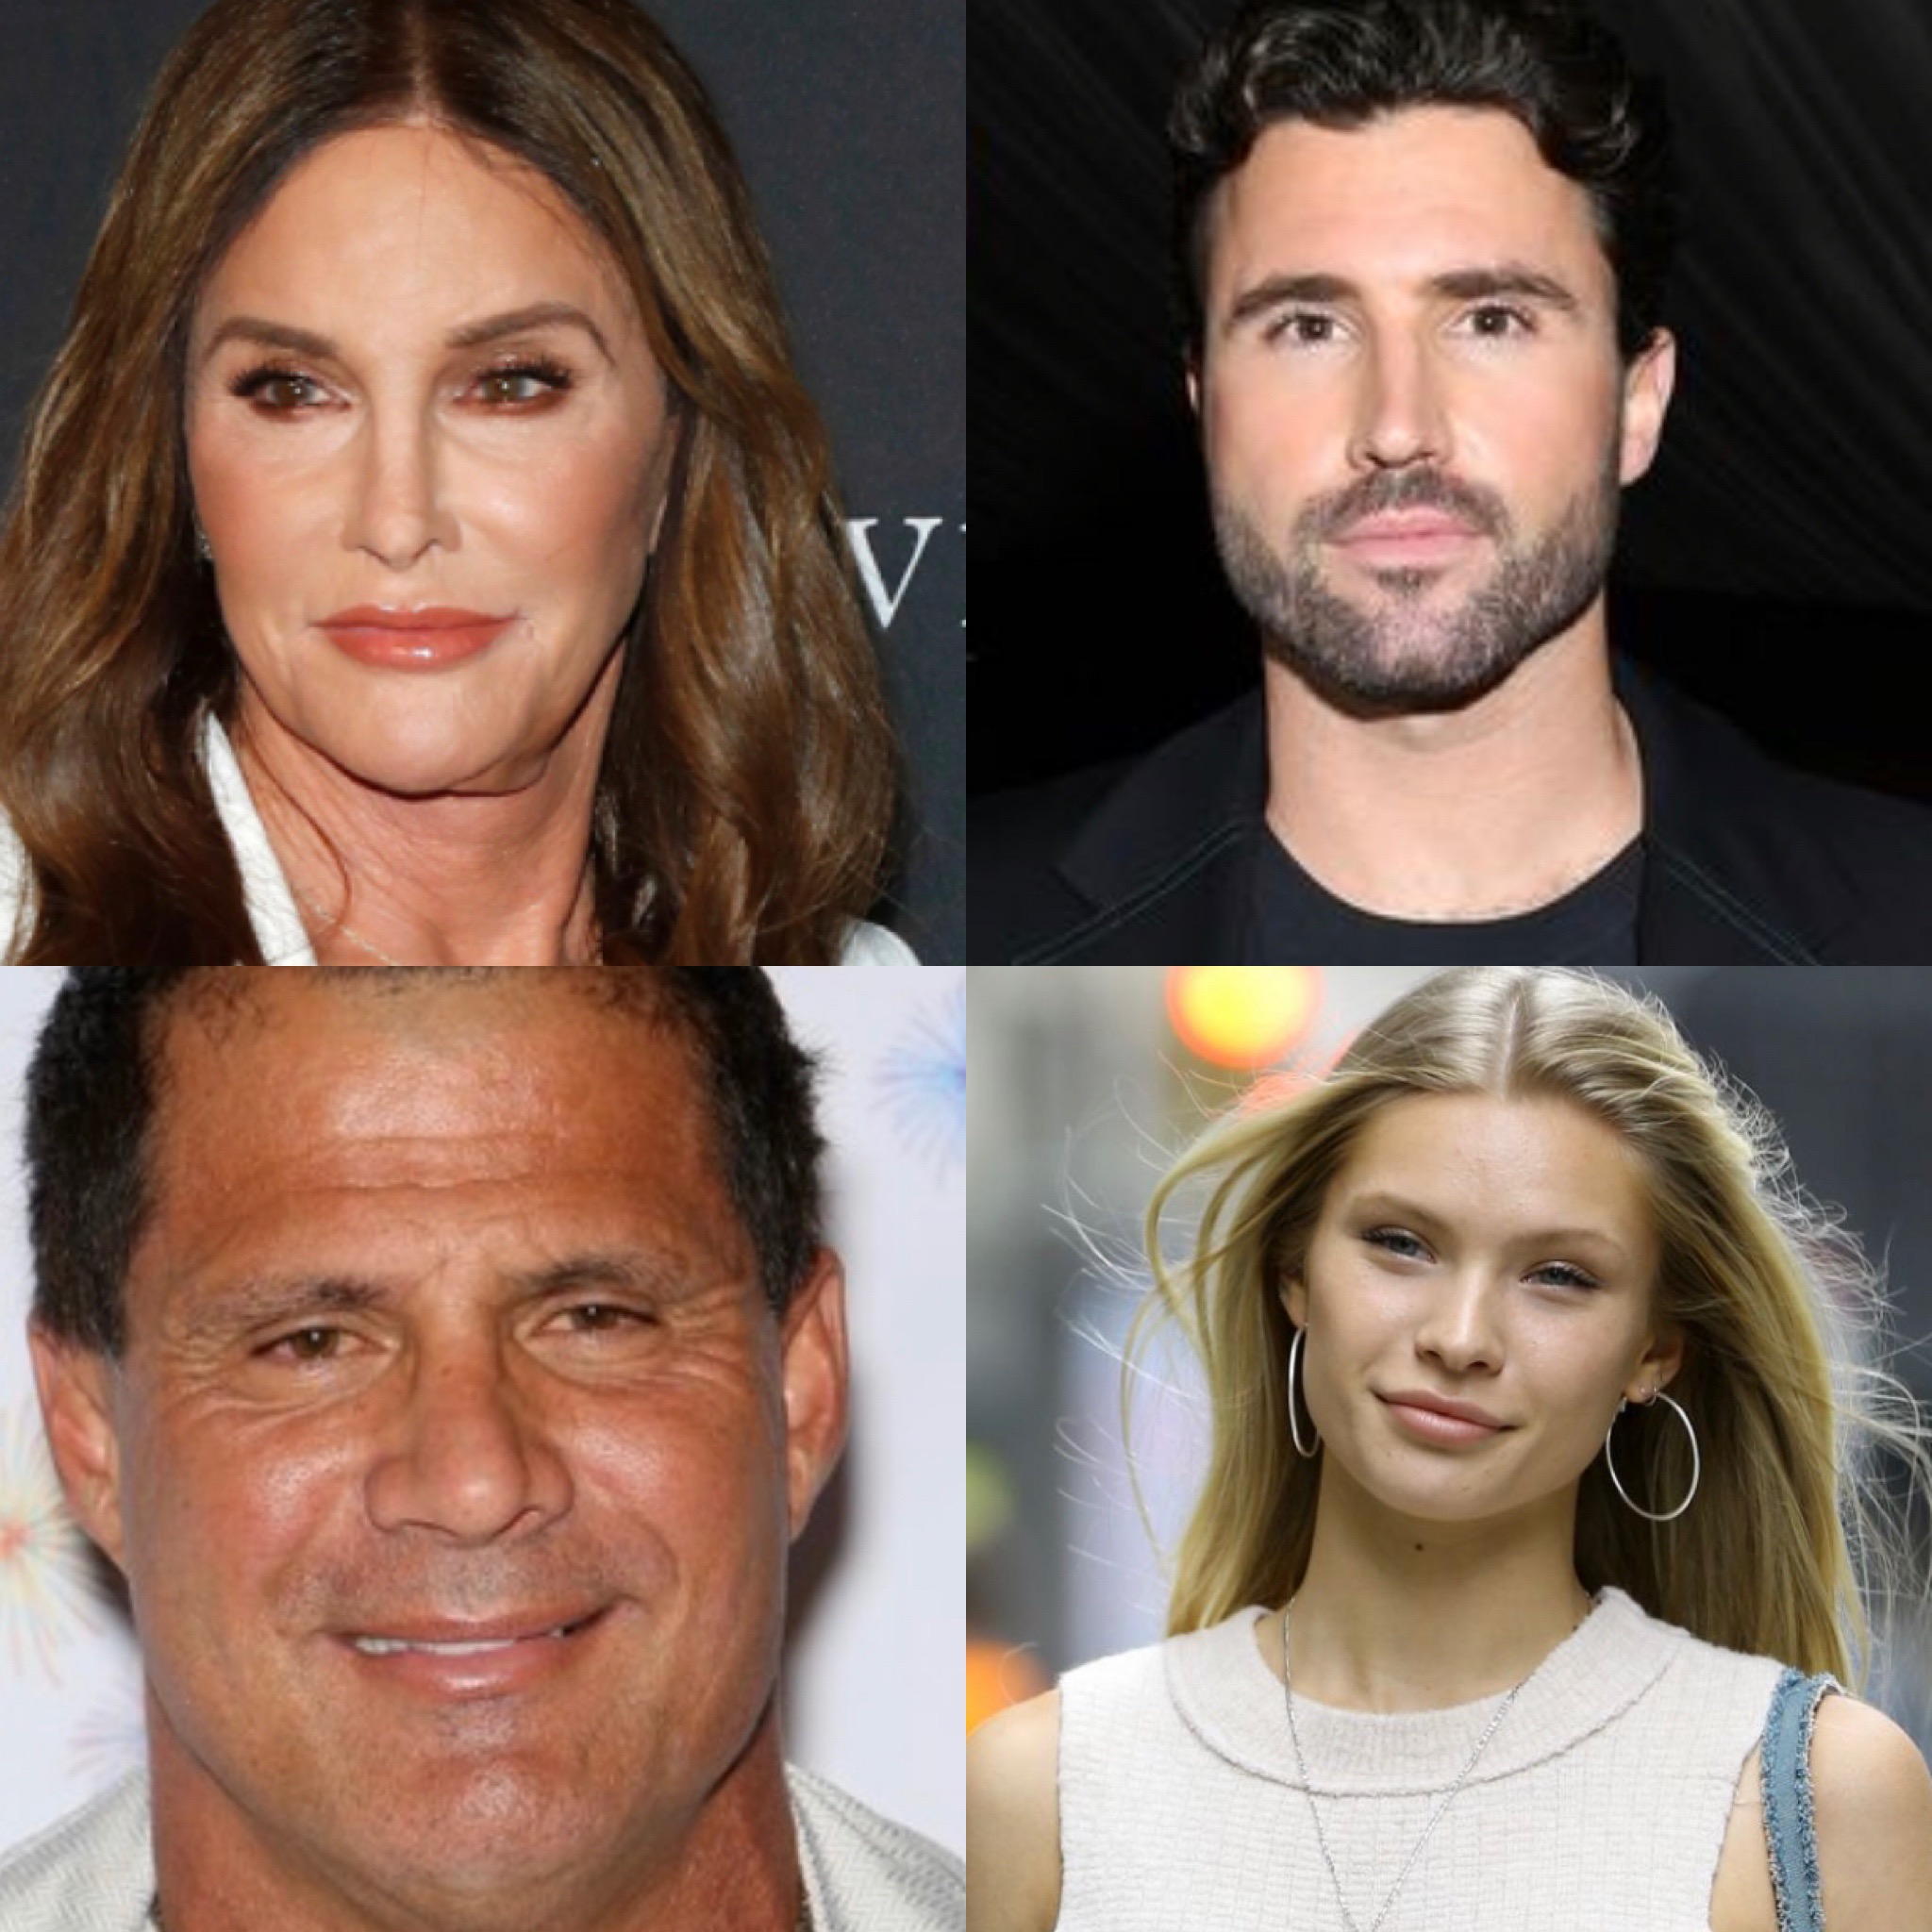 Details On Caitlyn Jenner’s Son Dating Jose Canseco’s Daughter; How Miley Cyrus and Liam Hemsworth Are Involved (Vids-Pics)